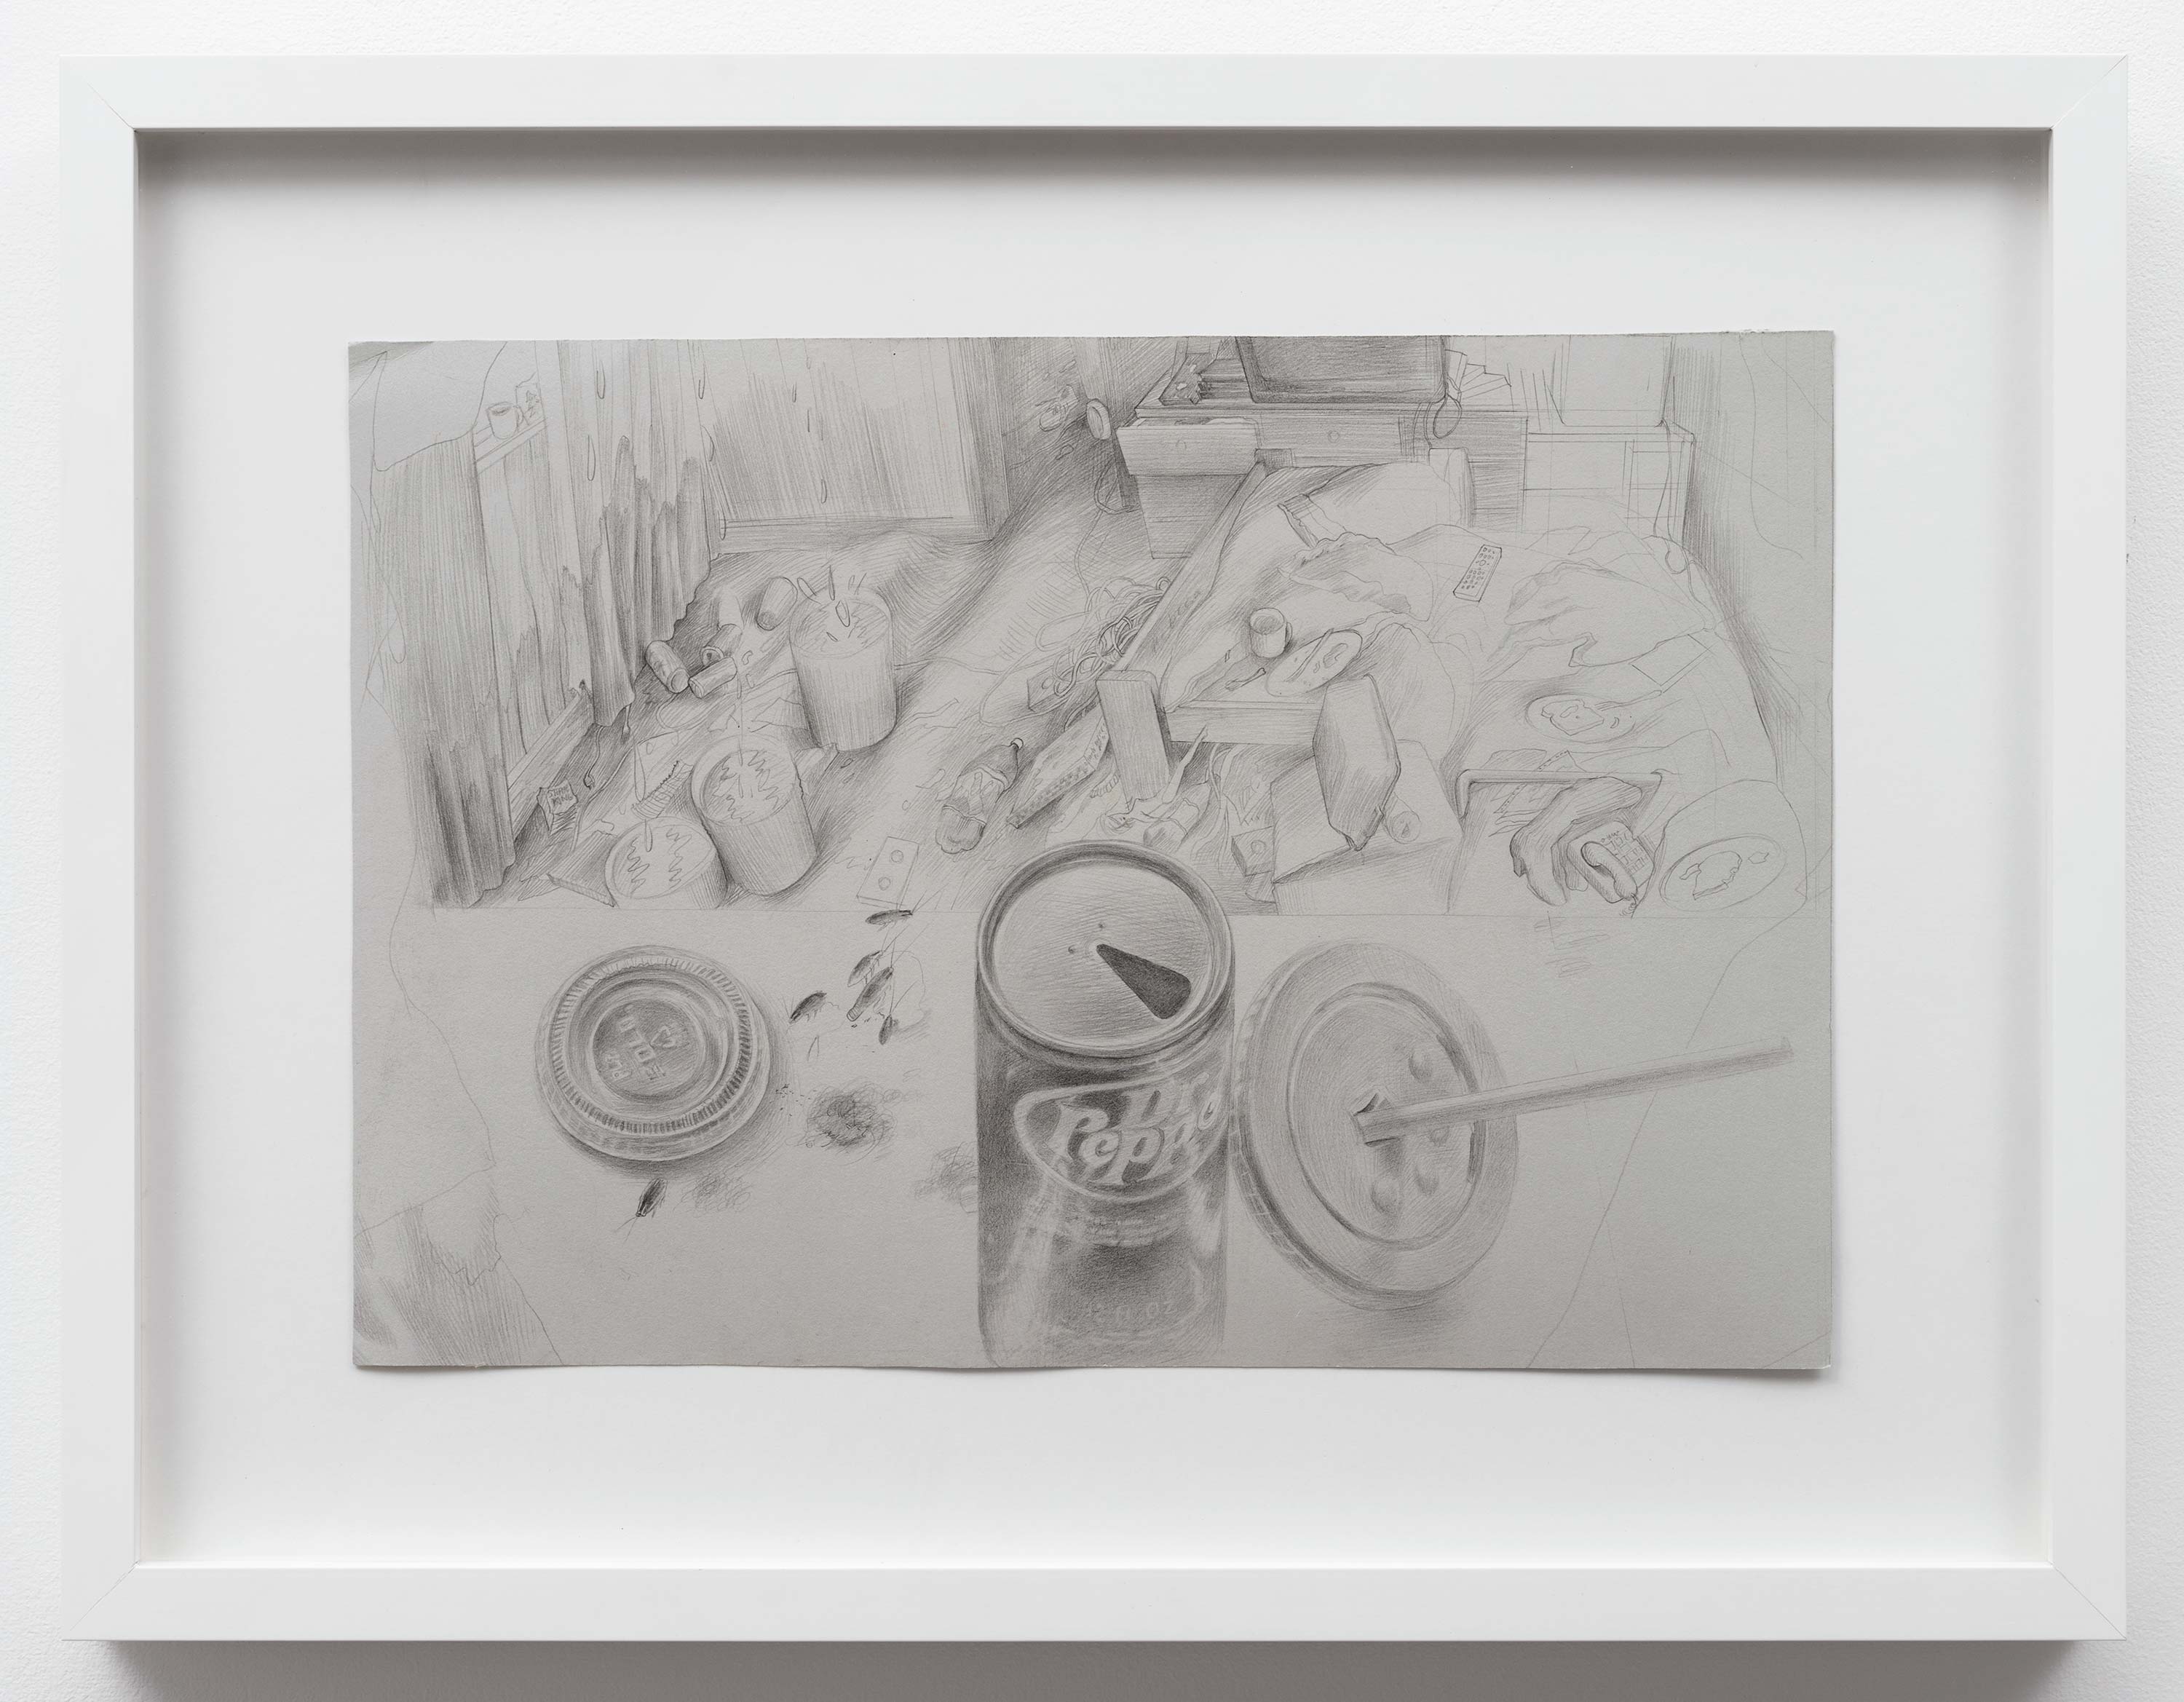 Brandi Twilley<br>Dr. Pepper and Living Room<br>2014<br>Graphite on gray paper<br>15 x 10.5 inches (38 x 26.5 cm)